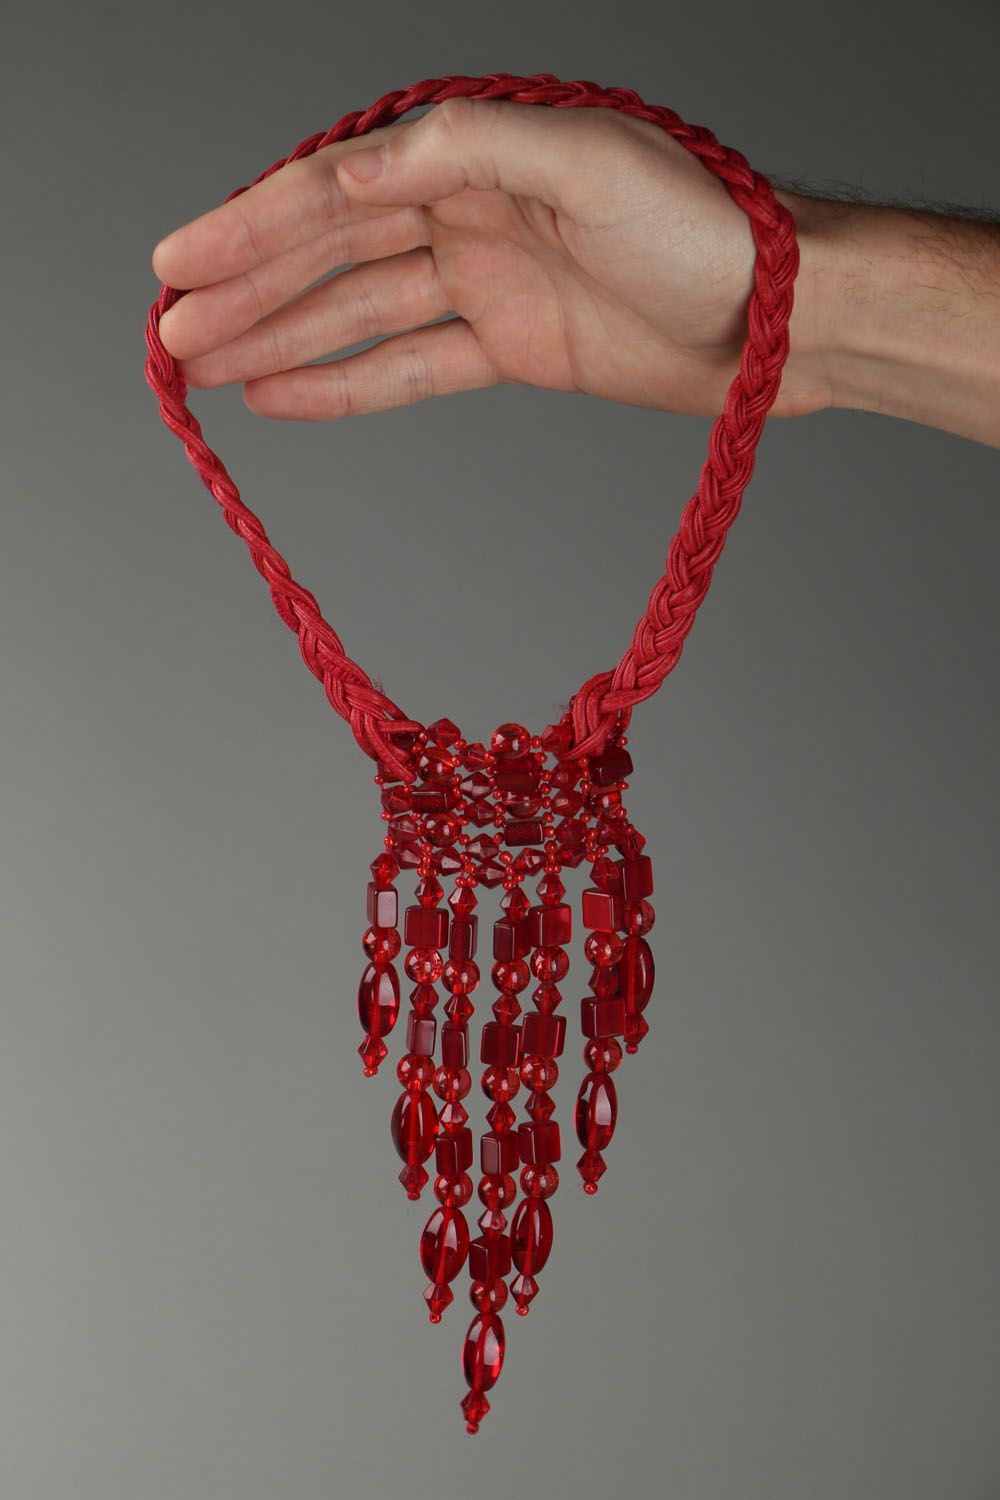 Red necklace photo 4